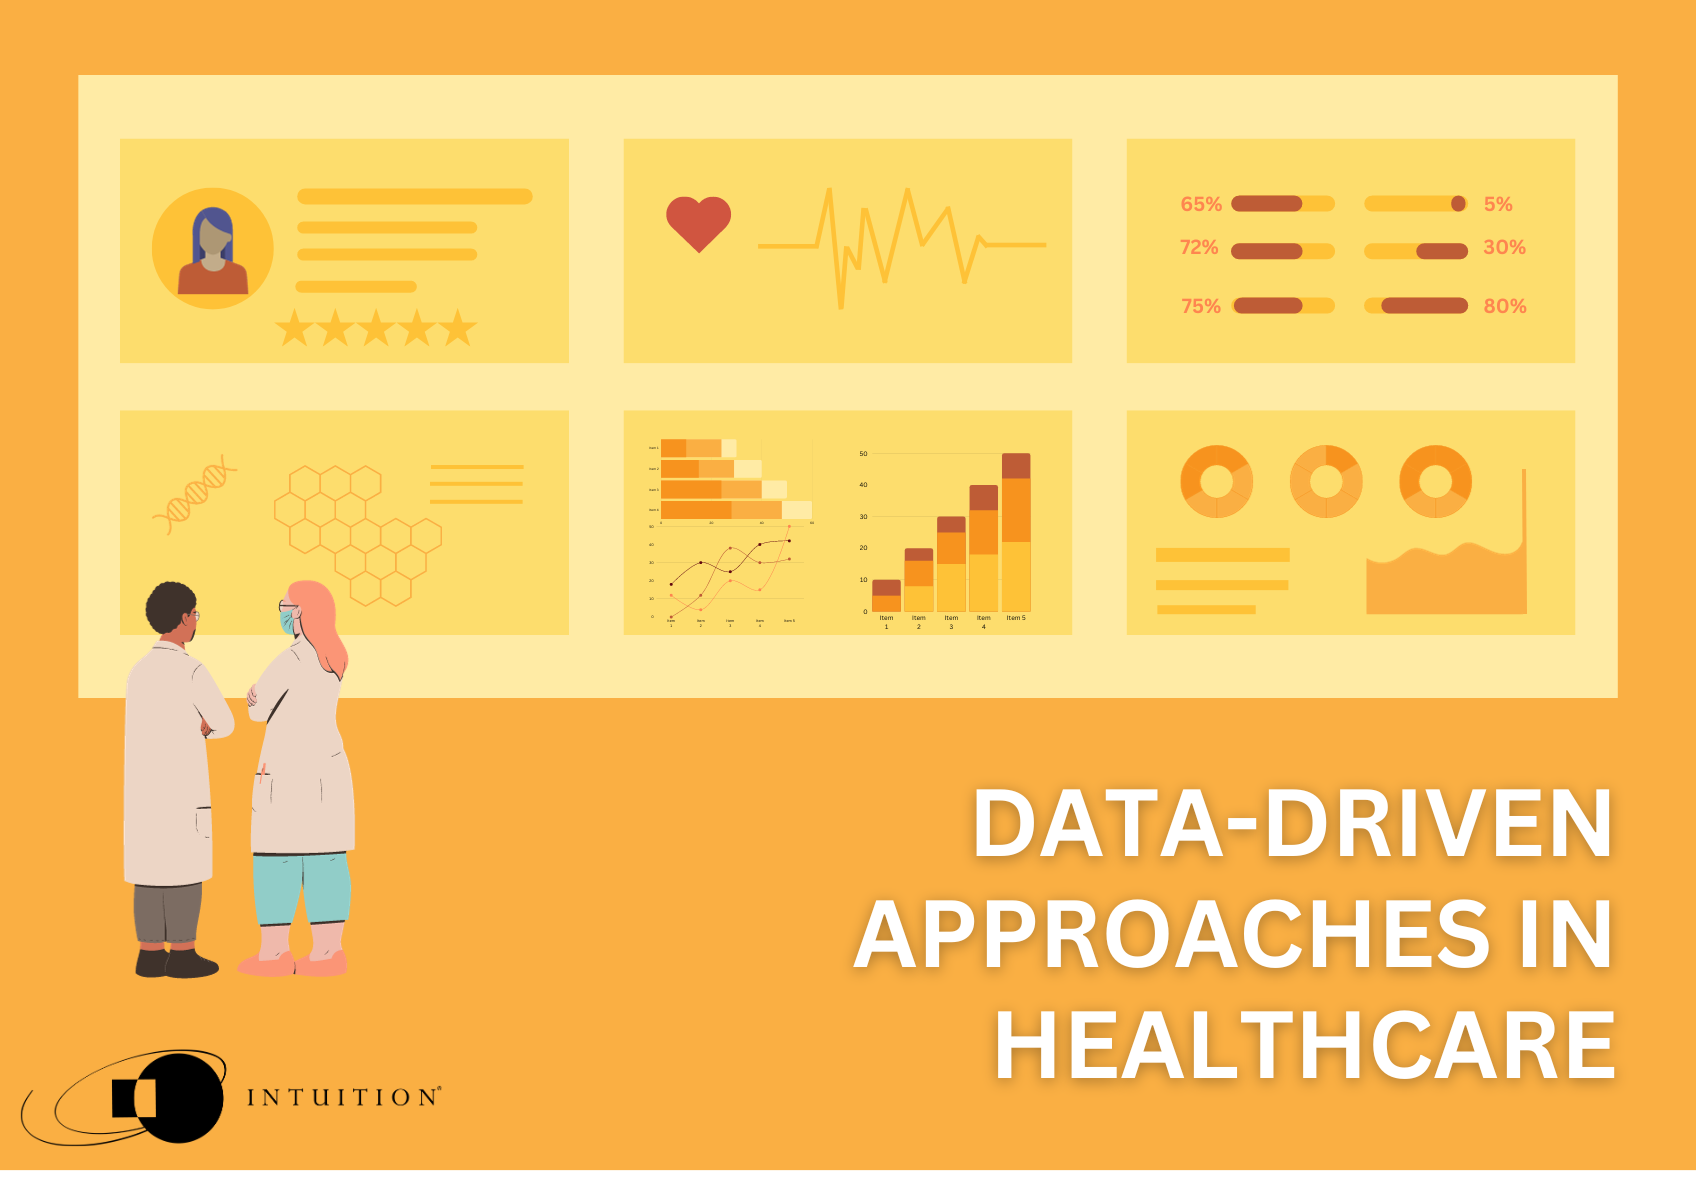 Data-driven approaches in healthcare